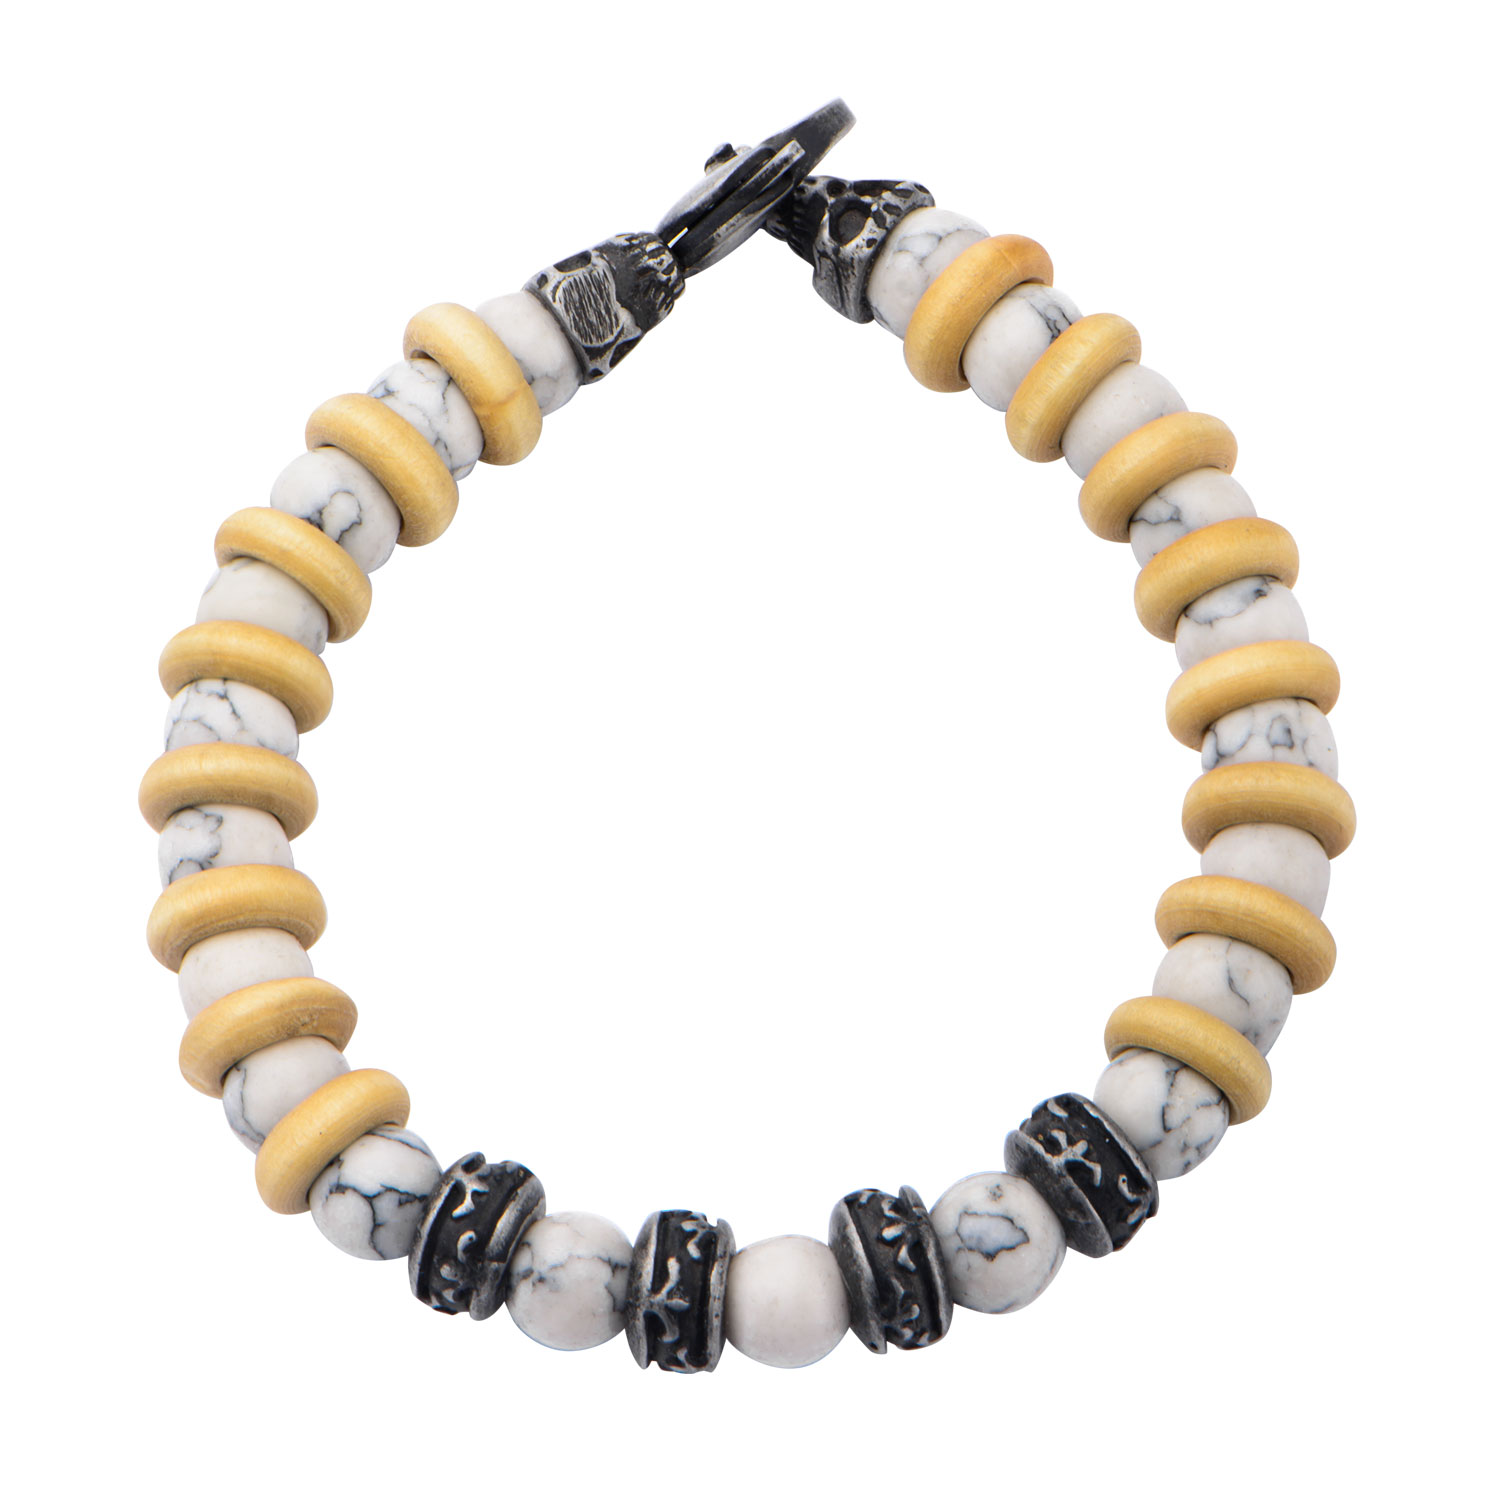 8mm White Howlite Beads with Taupe Wood Separators Bracelet Image 4 Enchanted Jewelry Plainfield, CT